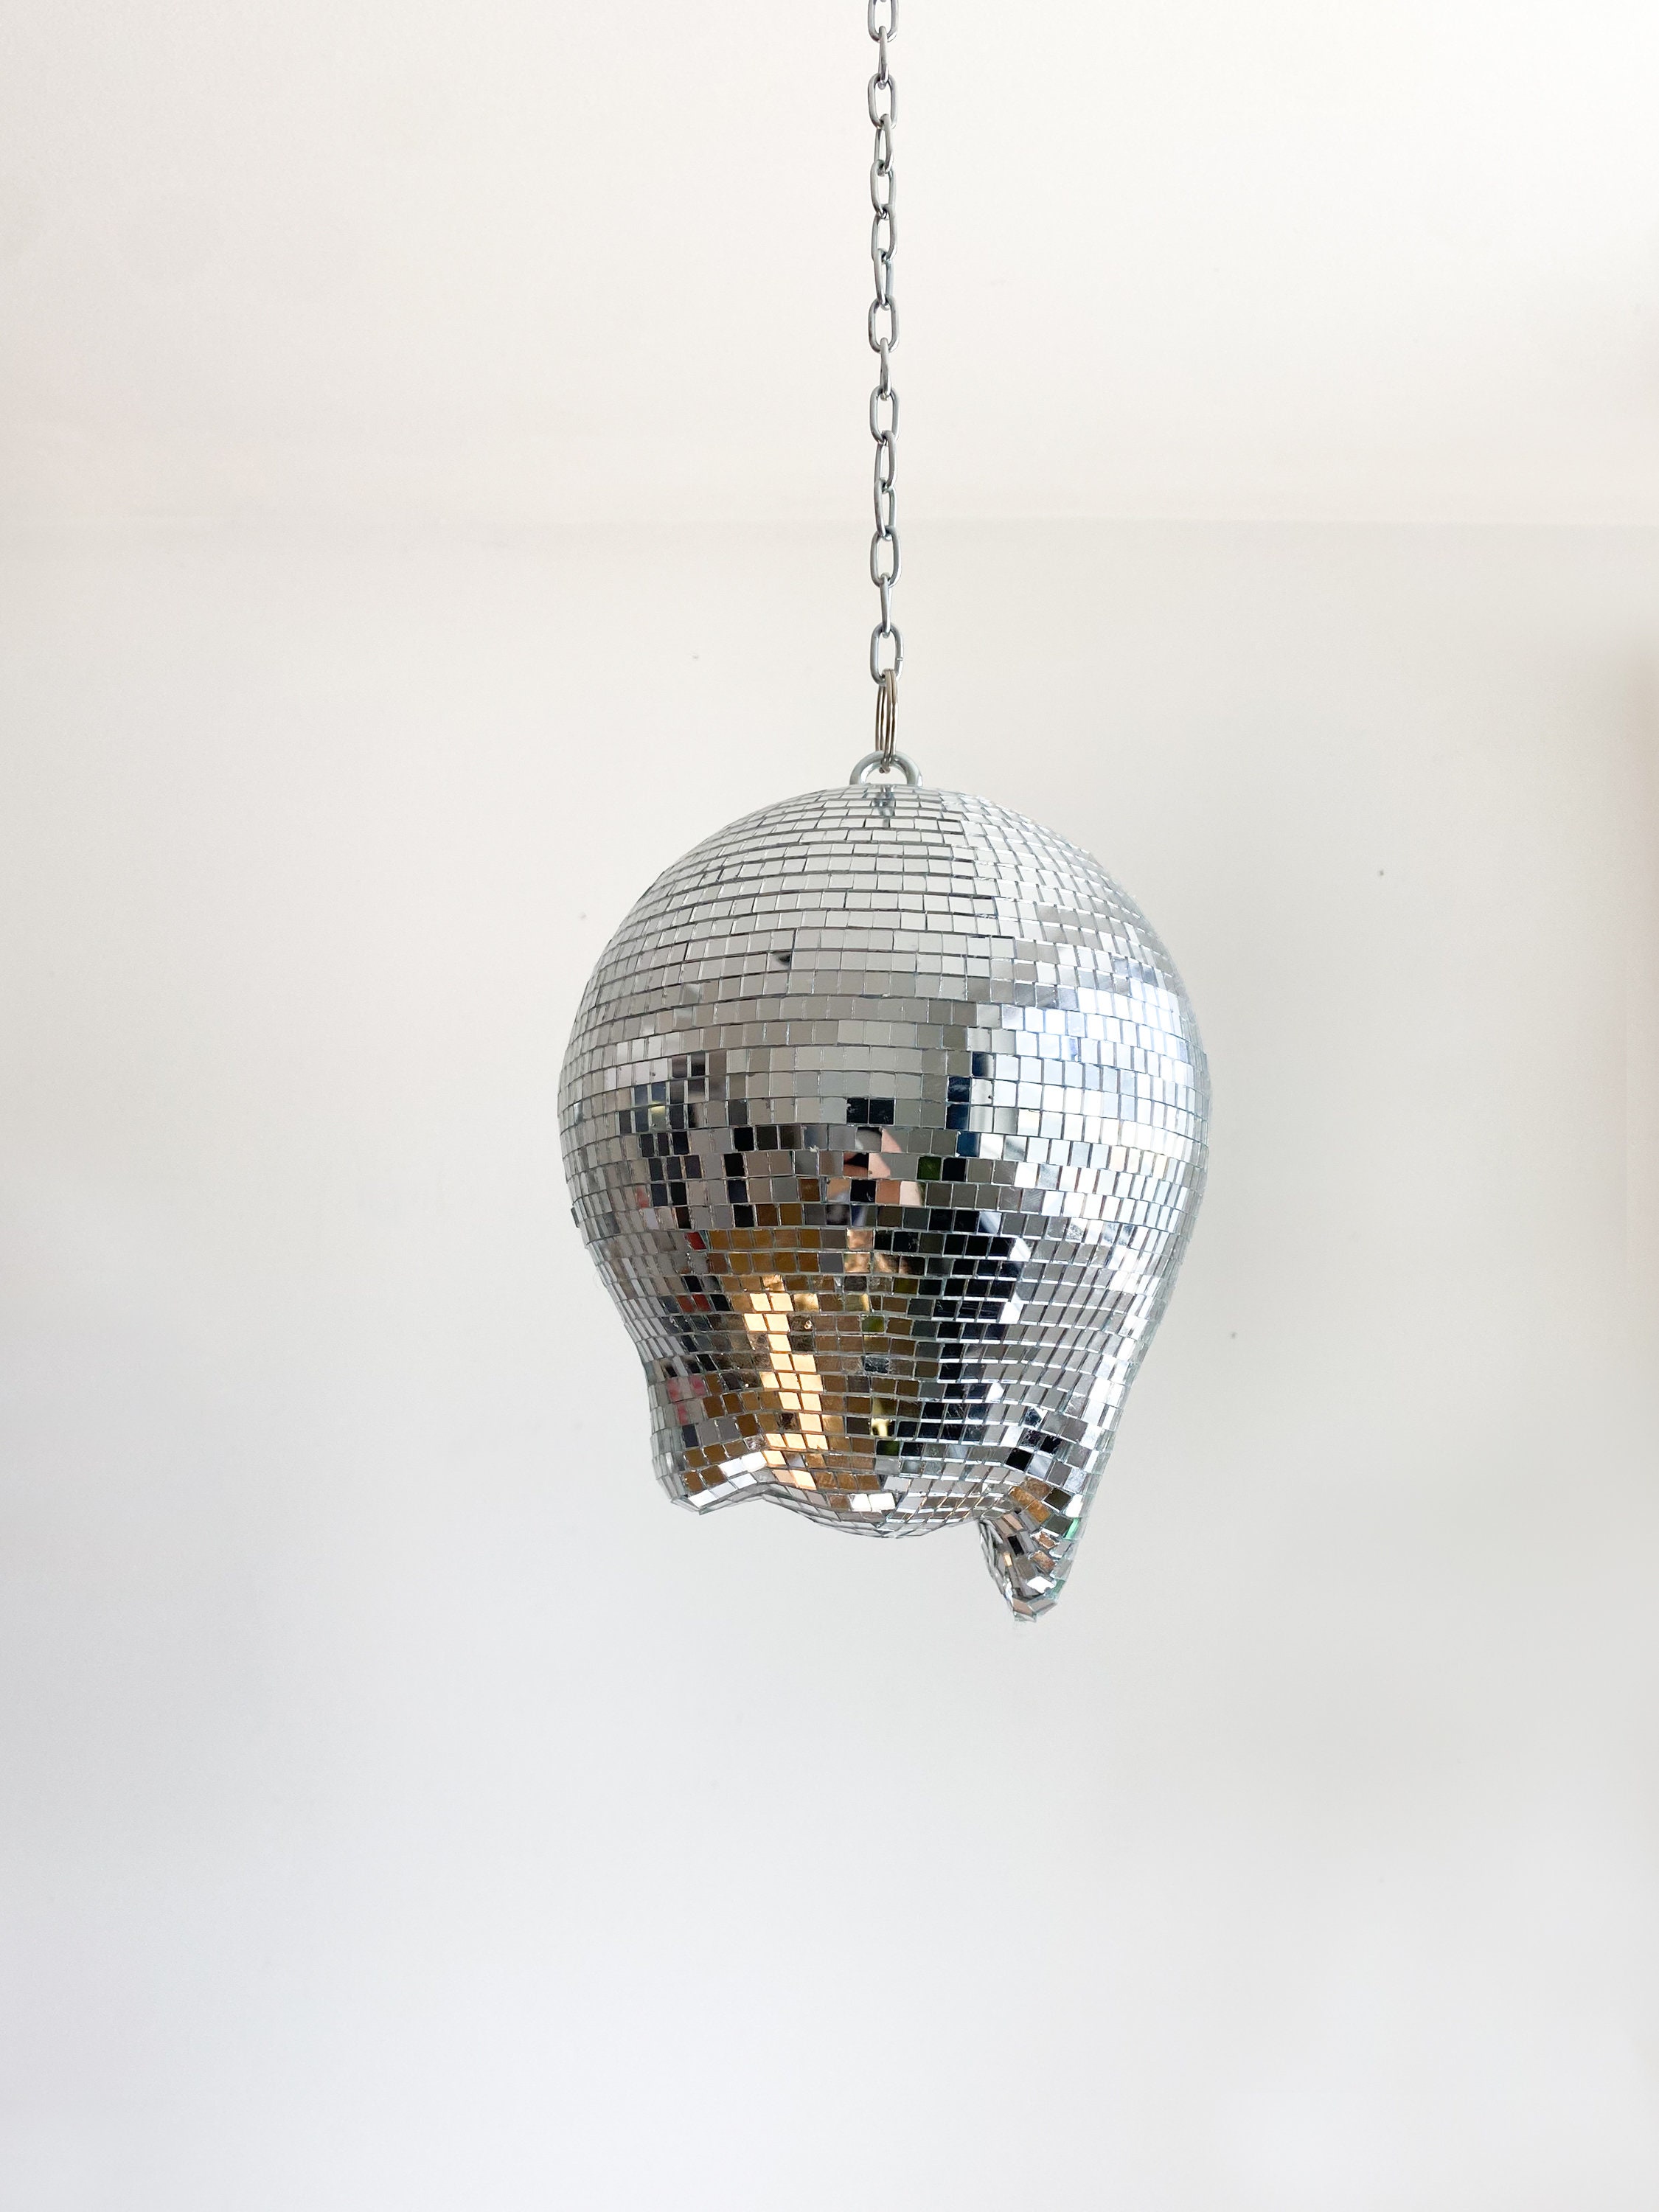 Melting Drippy Disco Ball Gold Pot Mirrored Melted Designs Metallic Home  Decor 